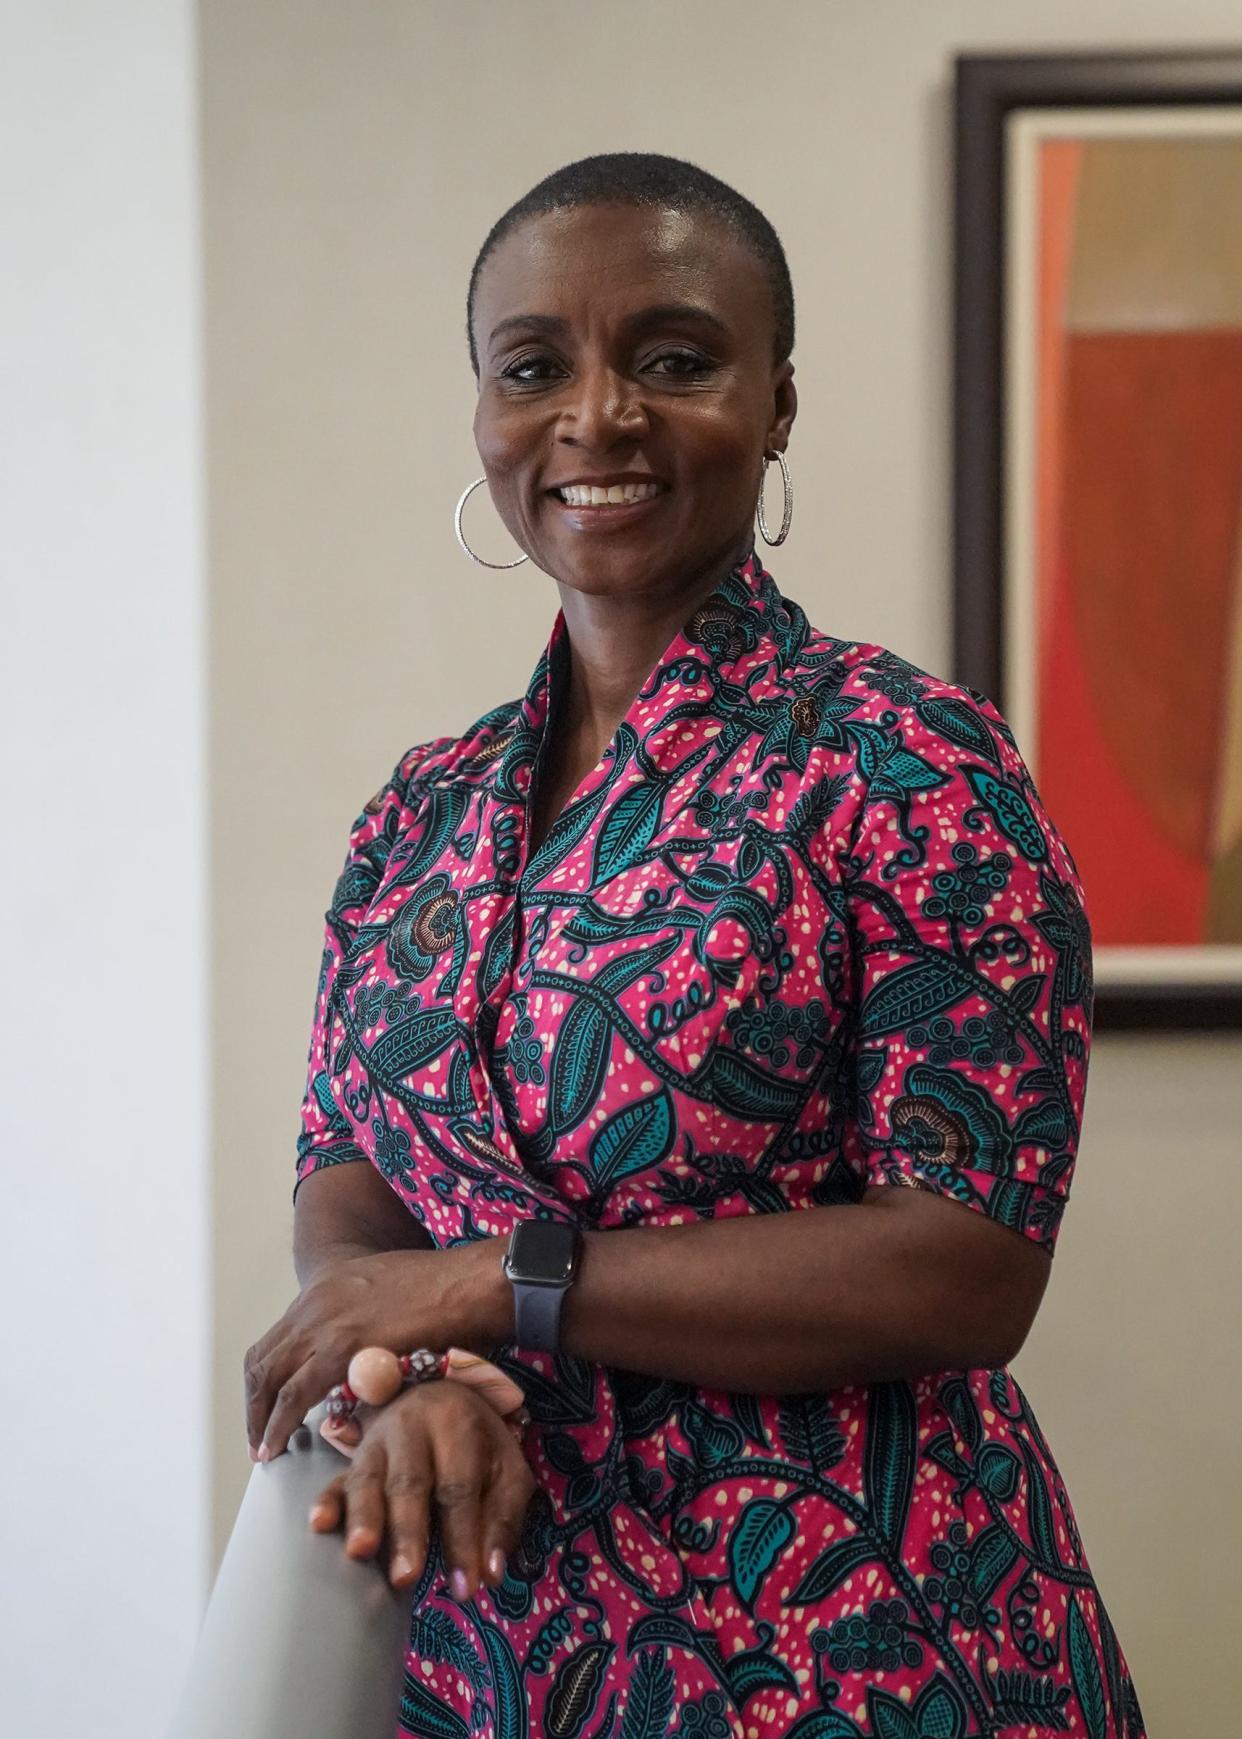 Registered nurse Isabella Naana Asante was photographed at Good Samaritan Hospital in Suffern on Wednesday, October 25, 2023. Asante, a breast cancer survivor is raising funds to open the Embrace Breast Cancer Care Center at Komfo Anokye teaching Hospital in Ghana.